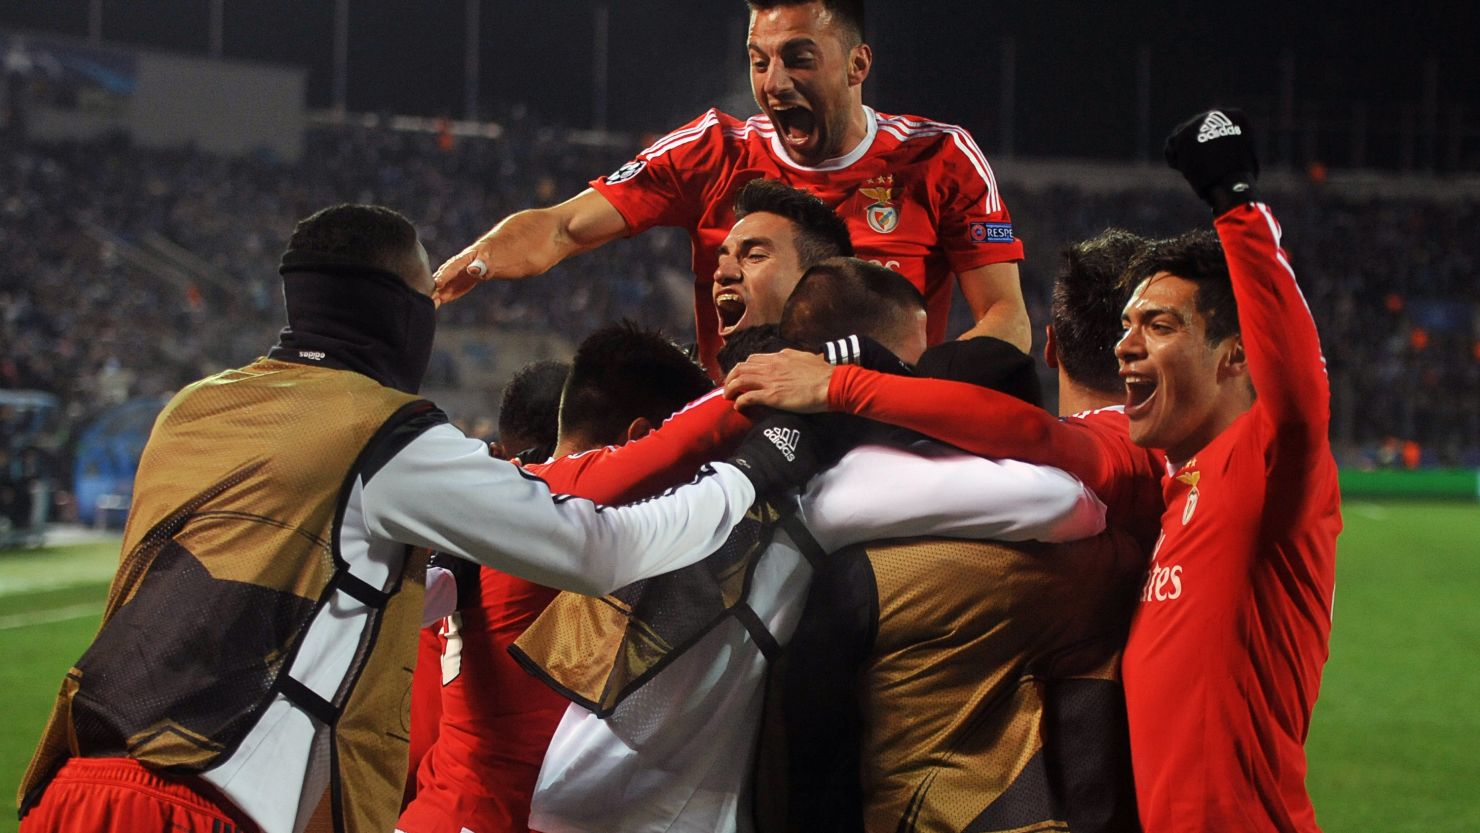 Benfica celebrates after winning in Russia